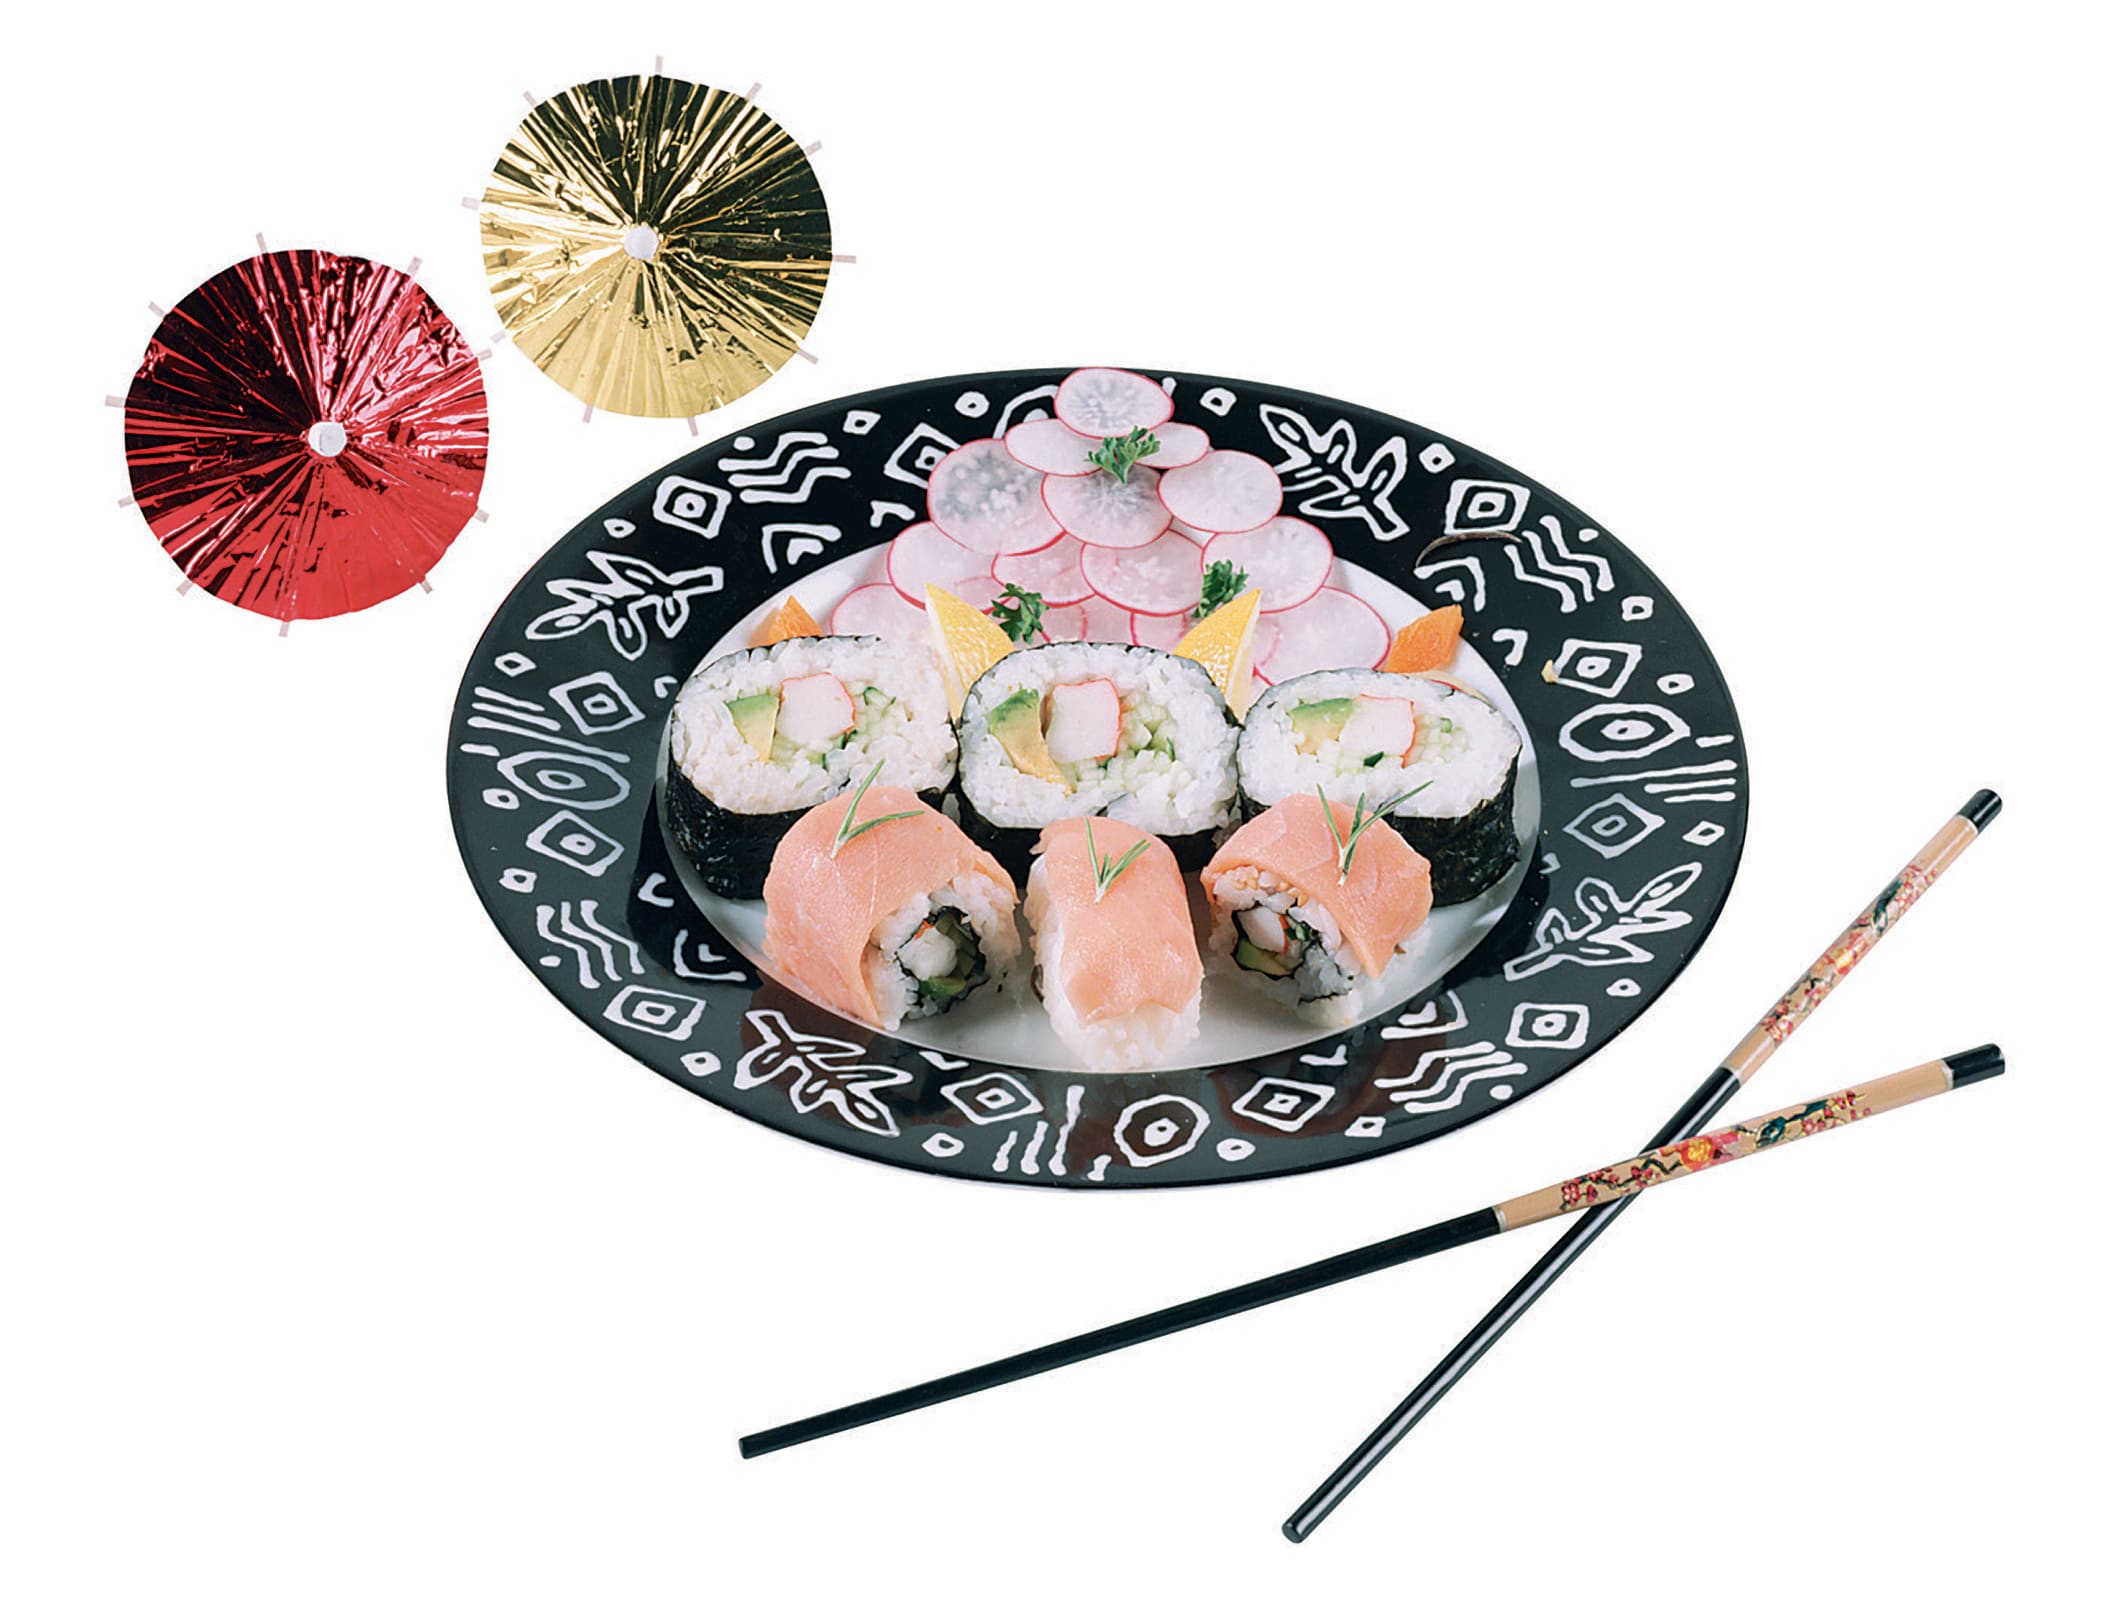 Raw Sushi on Black and White Plate with Chopsticks and Umbrellas Food Picture